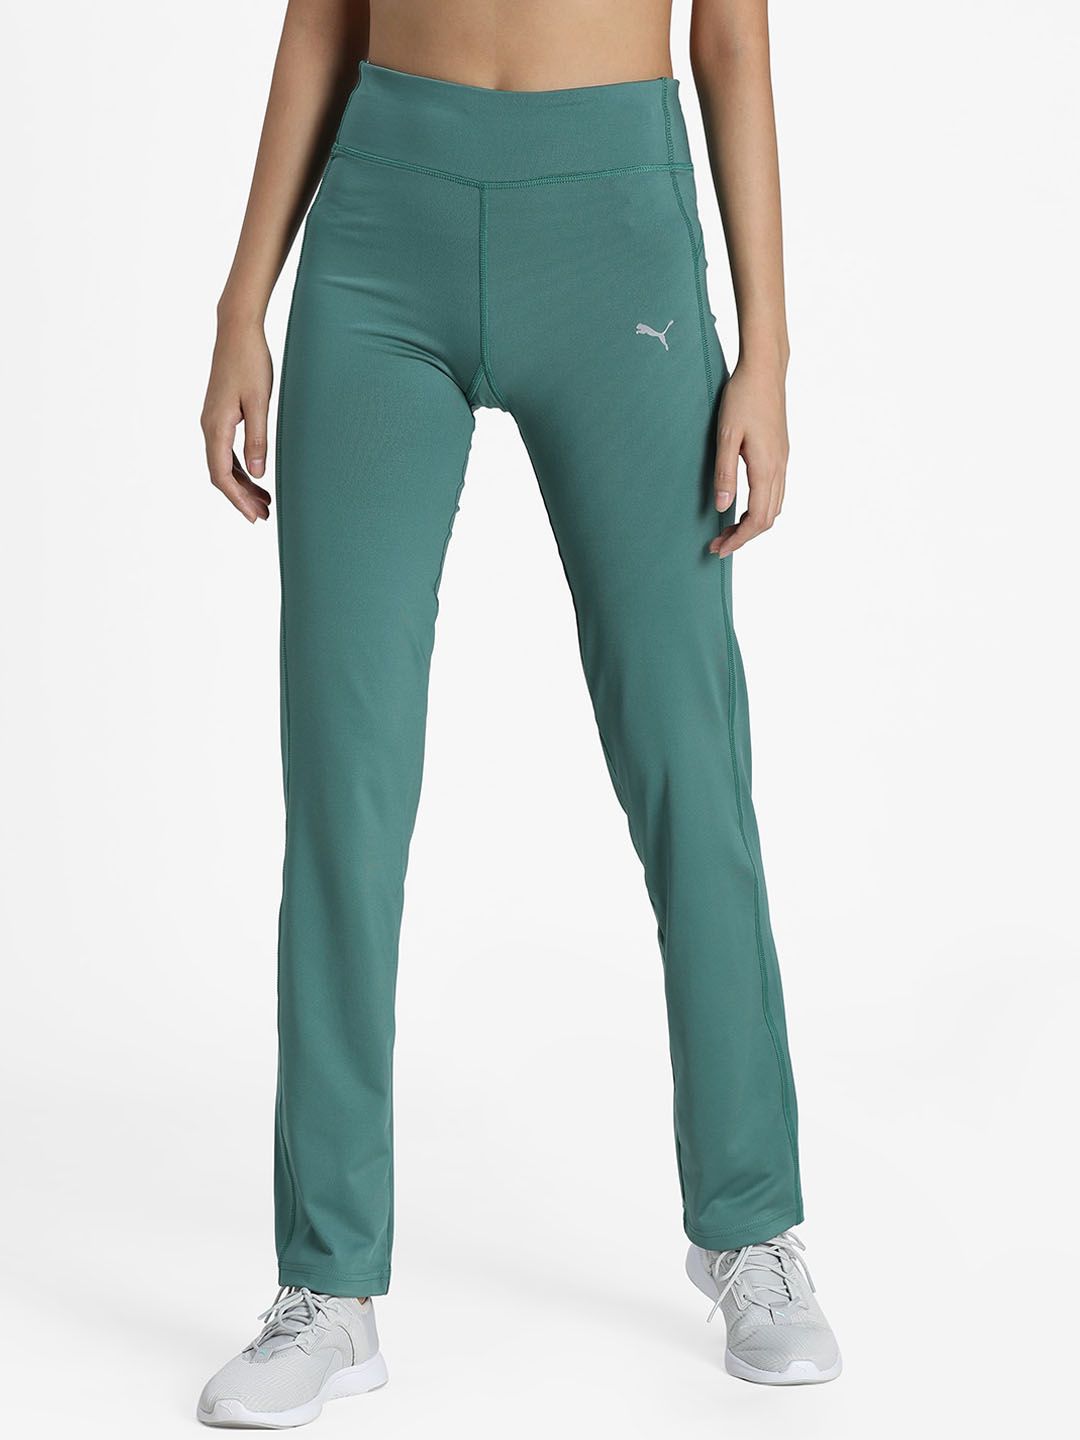 Puma Women Blue Solid Straight Leg Track Pants Price in India